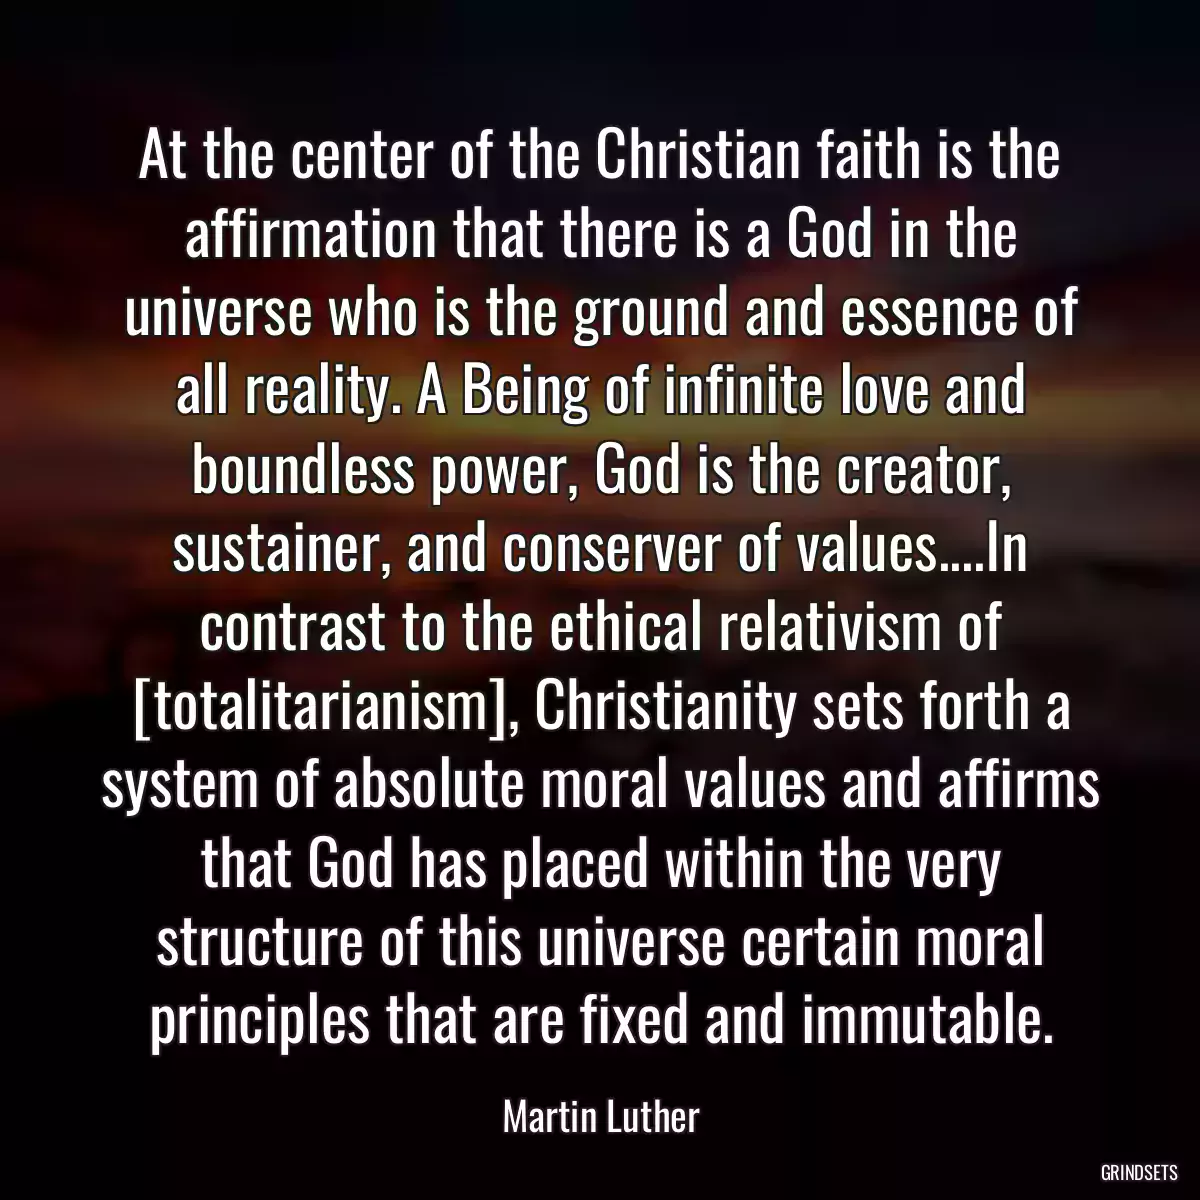 At the center of the Christian faith is the affirmation that there is a God in the universe who is the ground and essence of all reality. A Being of infinite love and boundless power, God is the creator, sustainer, and conserver of values....In contrast to the ethical relativism of [totalitarianism], Christianity sets forth a system of absolute moral values and affirms that God has placed within the very structure of this universe certain moral principles that are fixed and immutable.